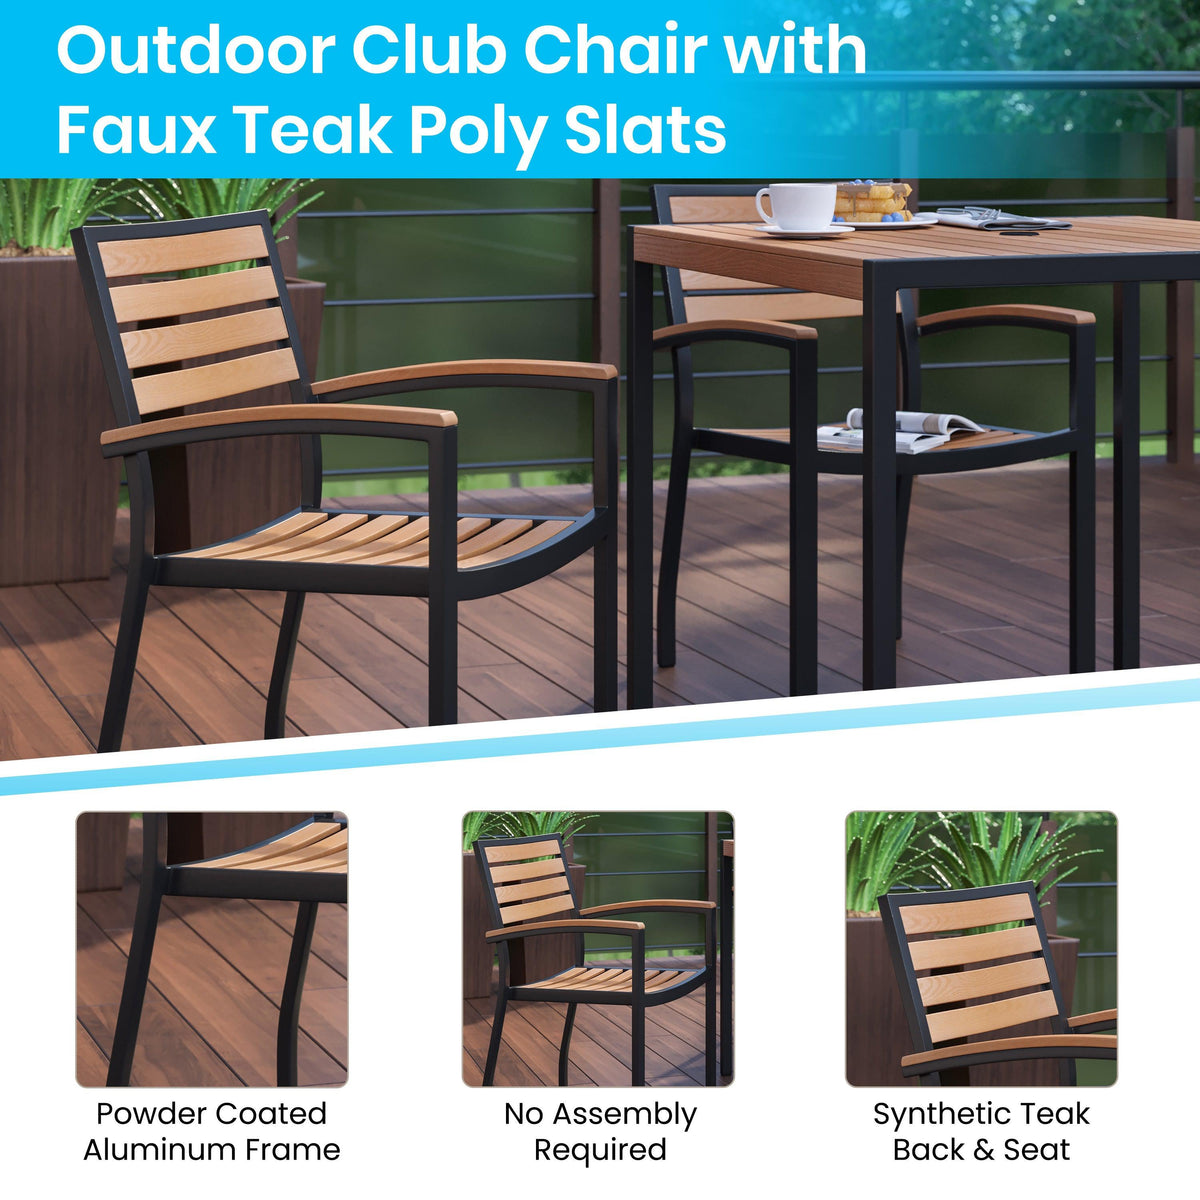 2 Faux Teak Accented Club Chairs - 30inch Square Faux Teak Patio Table Set